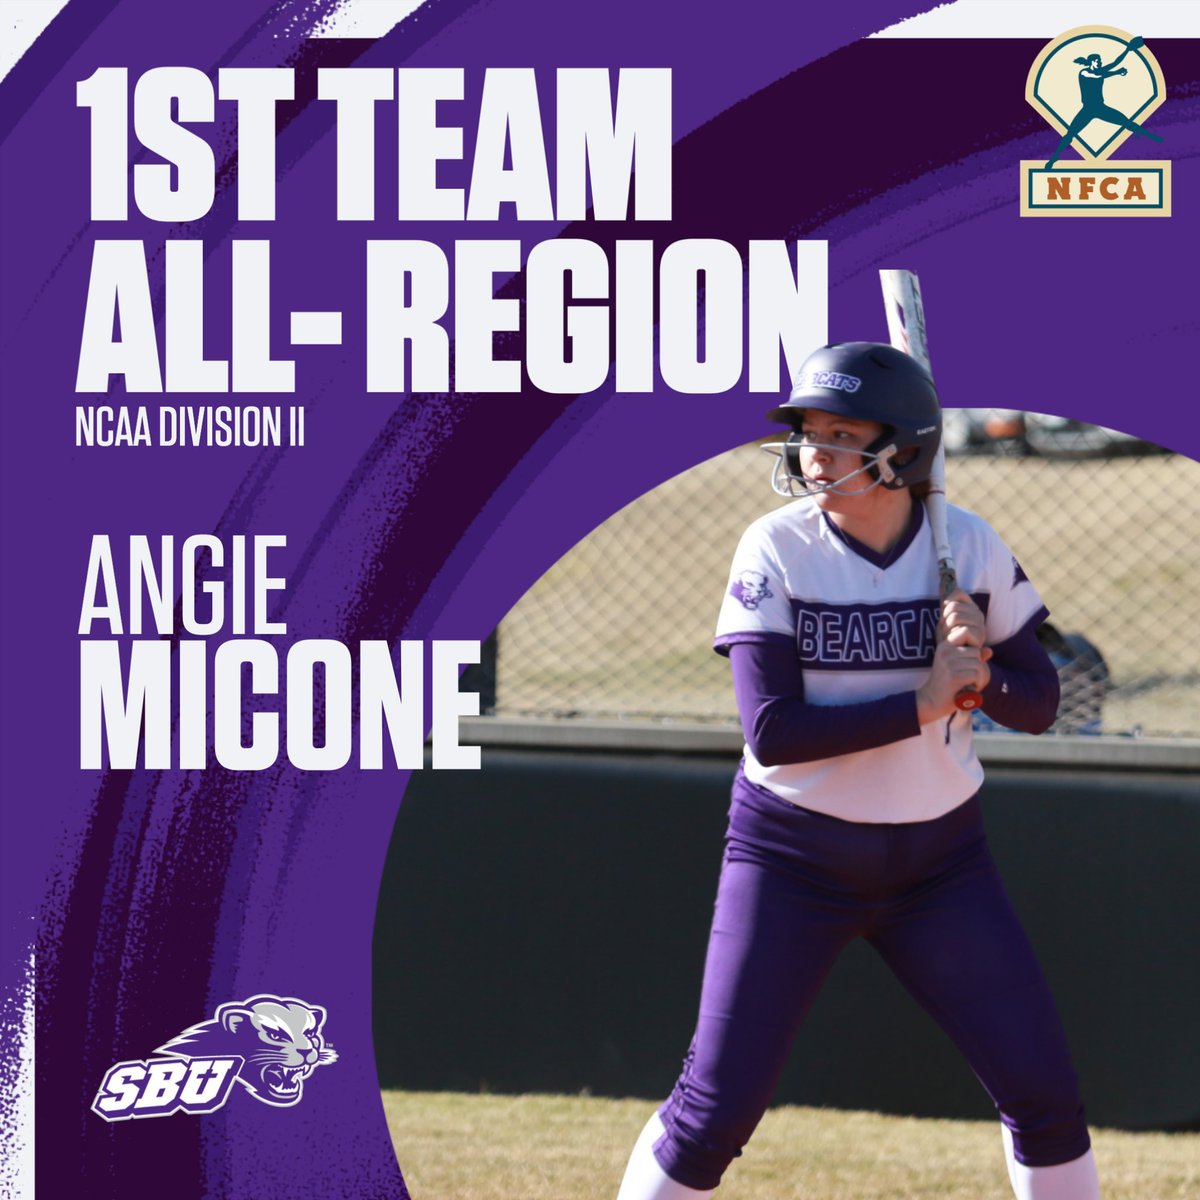 ‼️ALL-REGION‼️ FRESHMAN Angie Micone earns @NFCAorg 1st Team All-Region award!! @SBUbearcats_SB first since 1988!! Way to go Angie!! #RollCats @GLVCsports